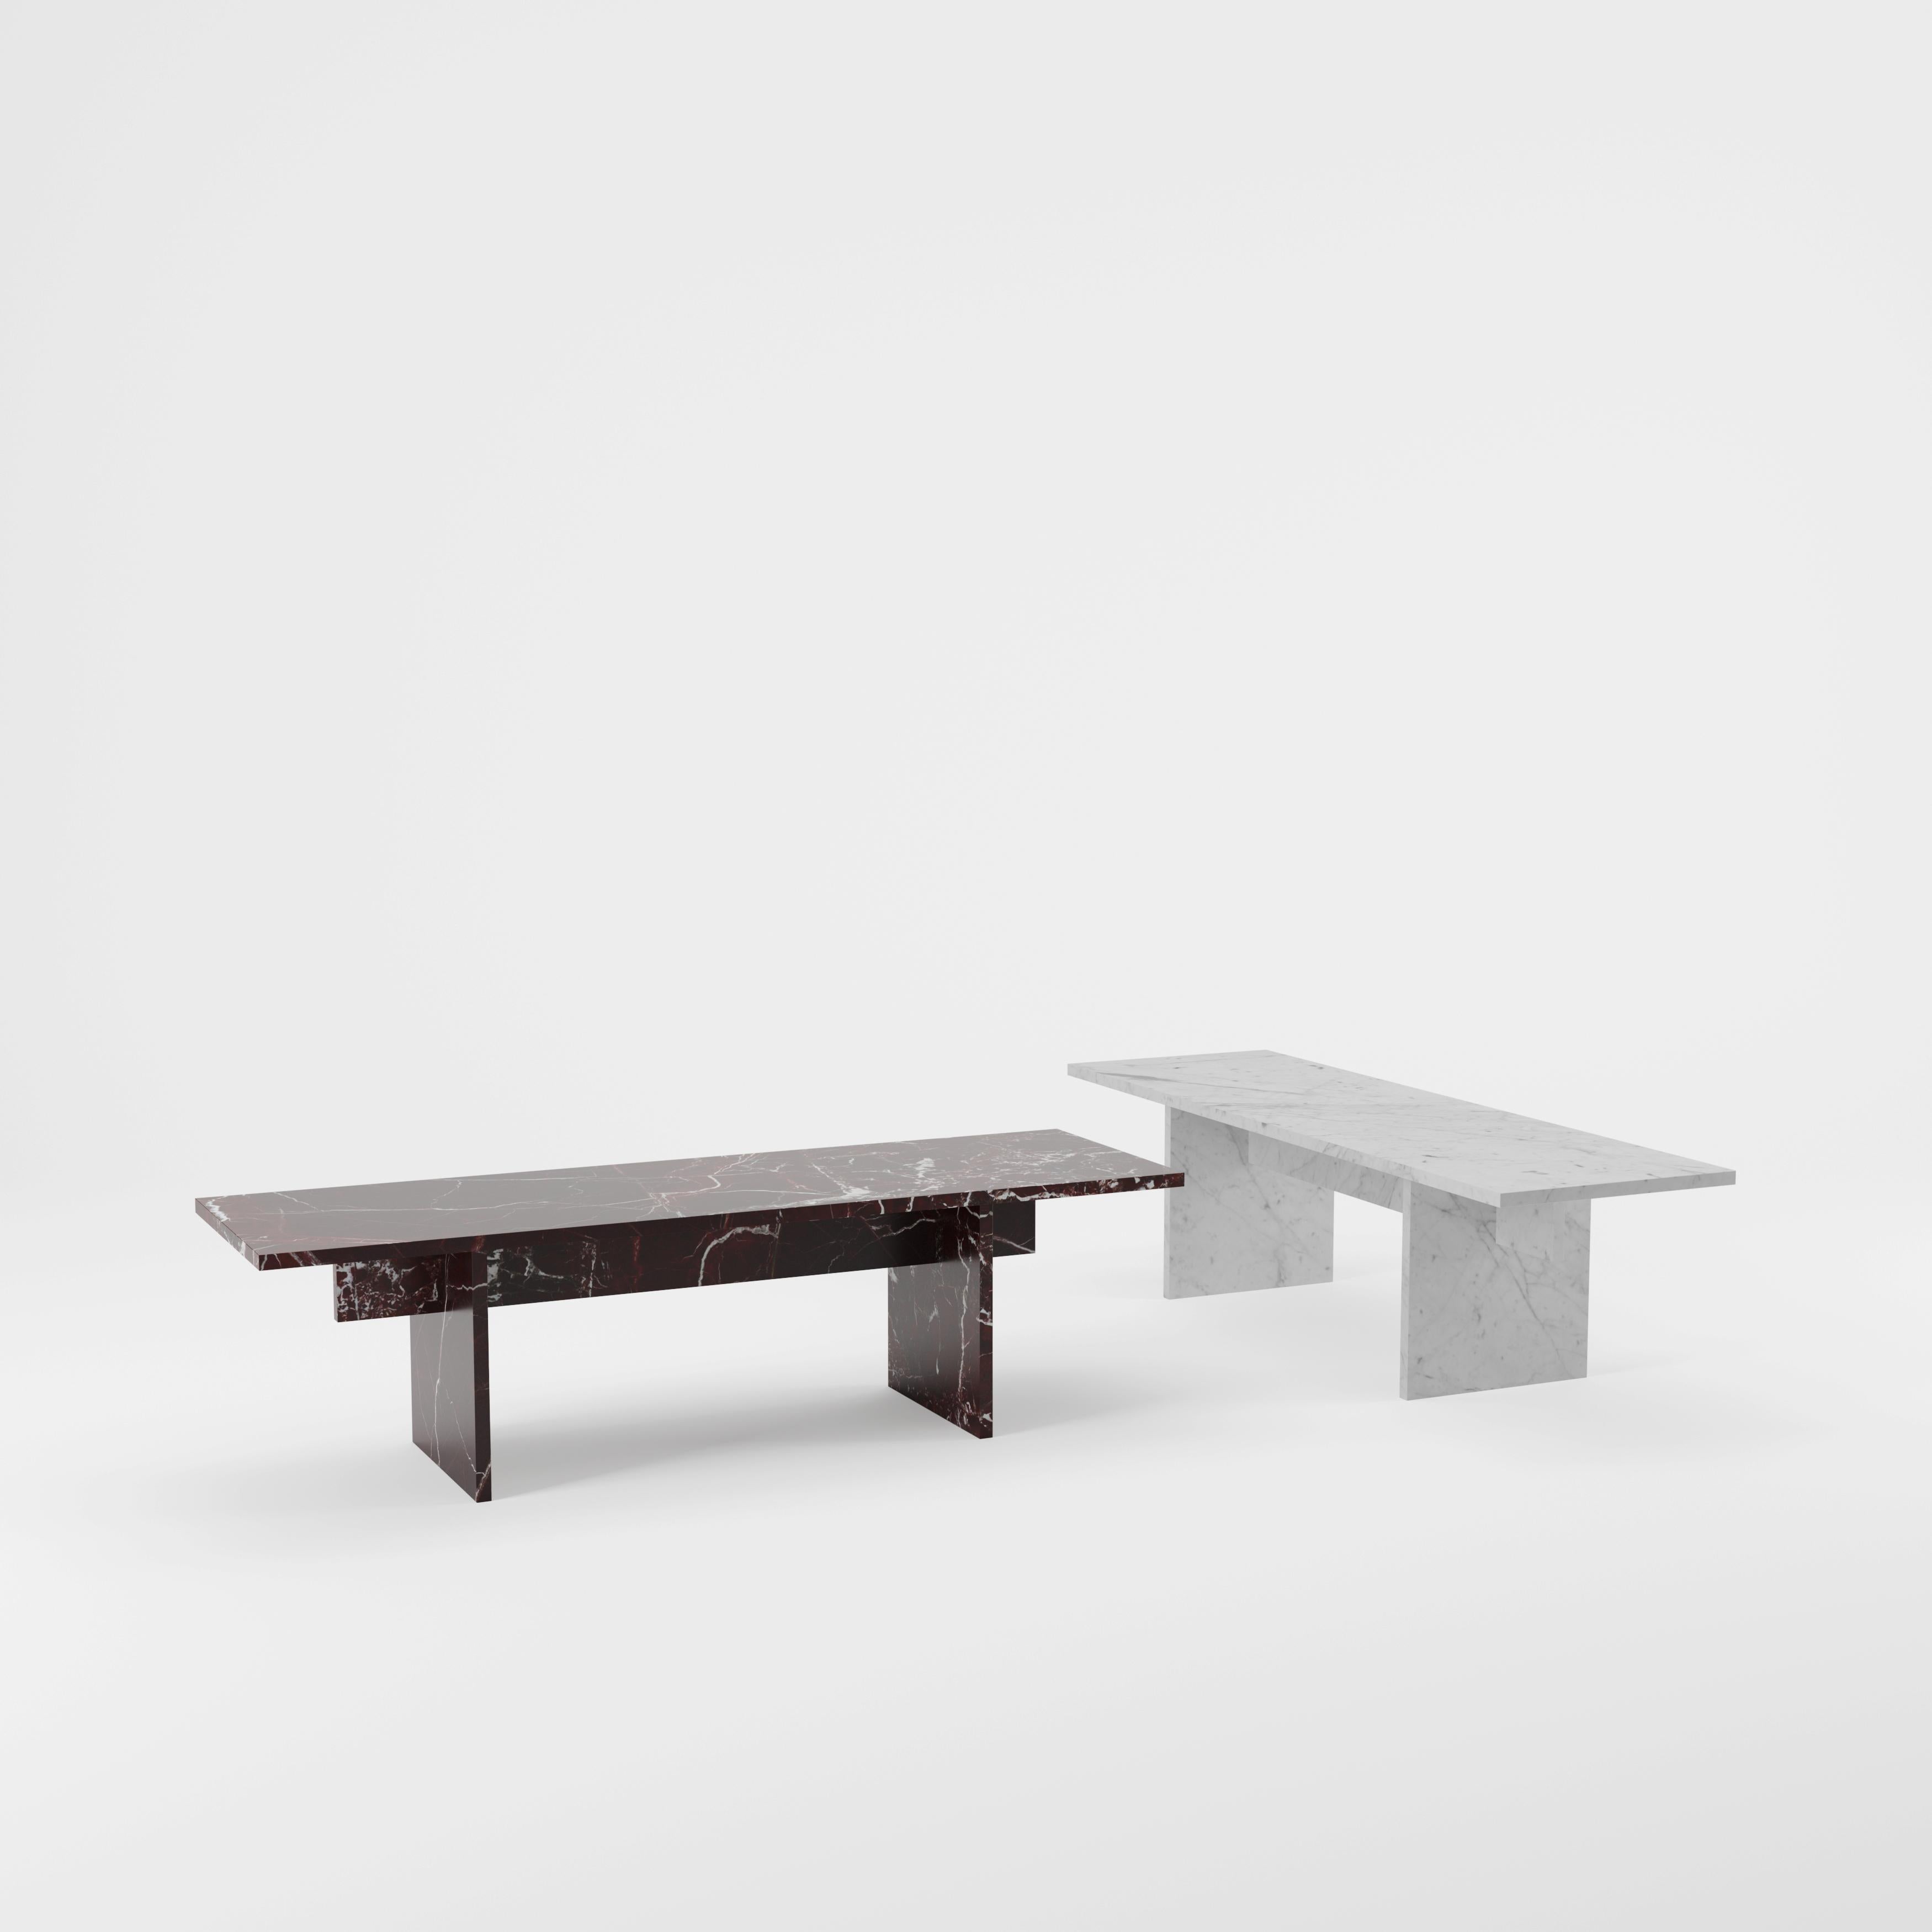 Minimalist Vondel Coffee Table/Bench Handcrafted in Honed Bianco Carrara Marble For Sale